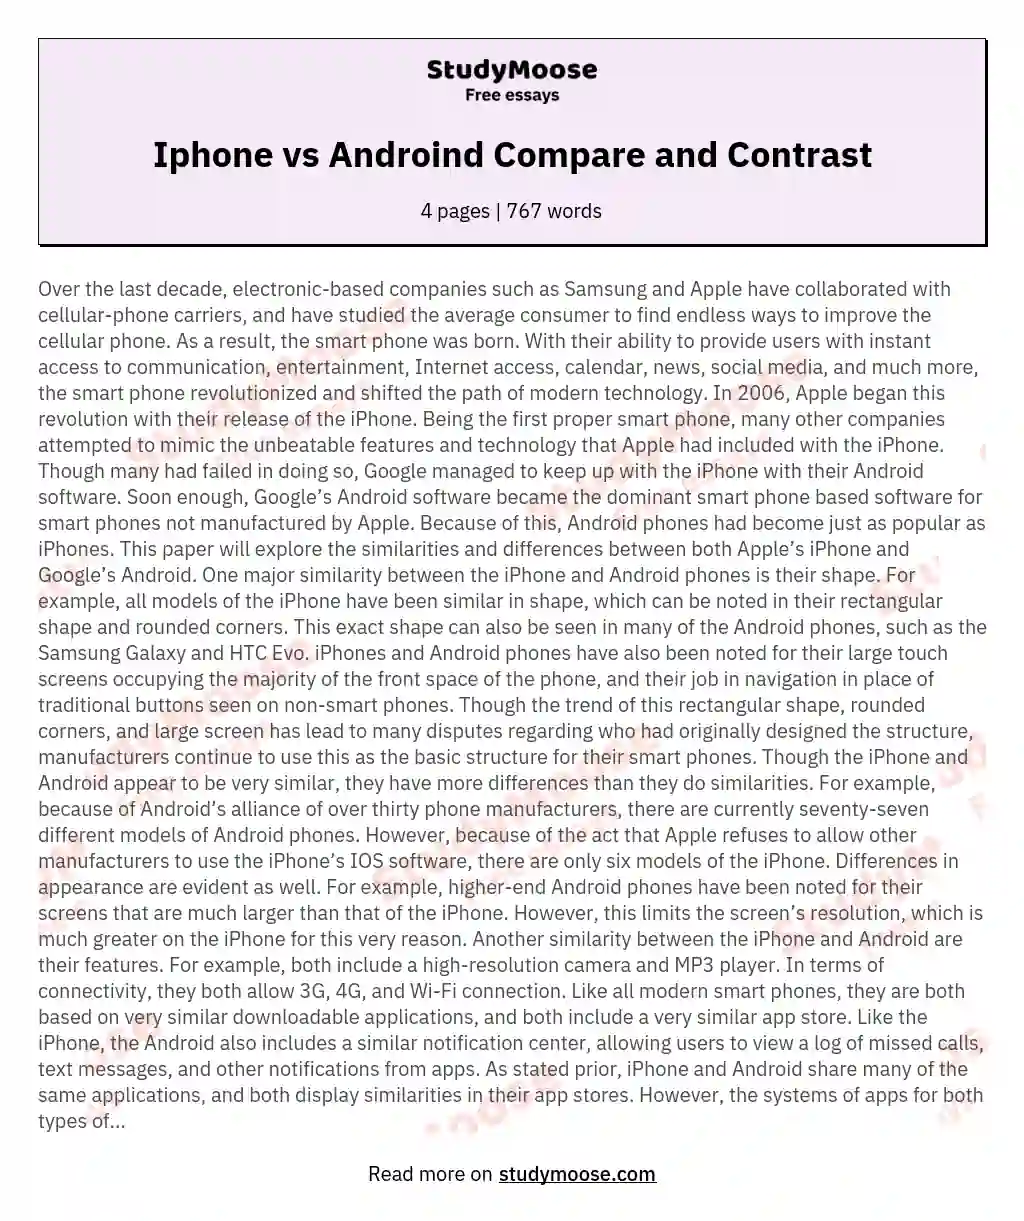 Iphone vs Androind Compare and Contrast essay